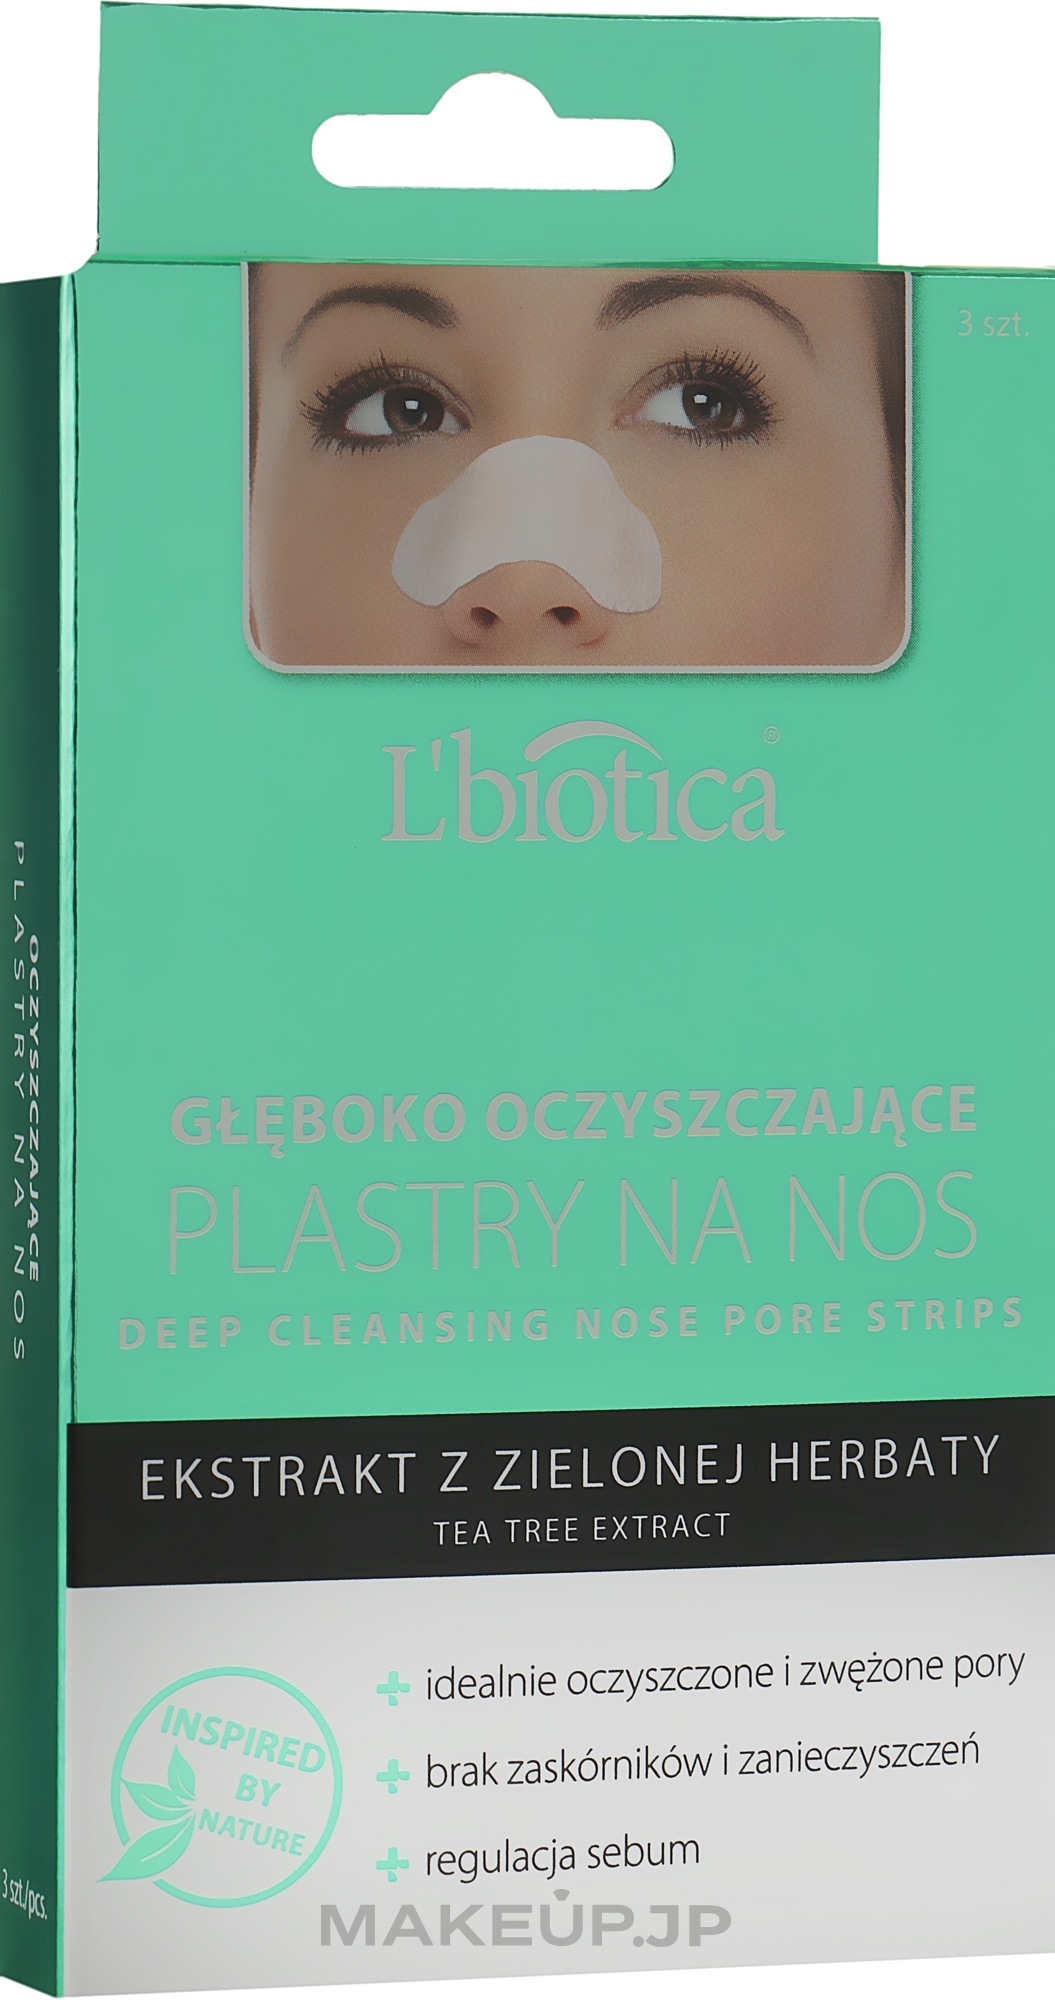 Deep Cleansing Nose Patches - L'biotica Deep Cleansing Nose Patches — photo 3 szt.